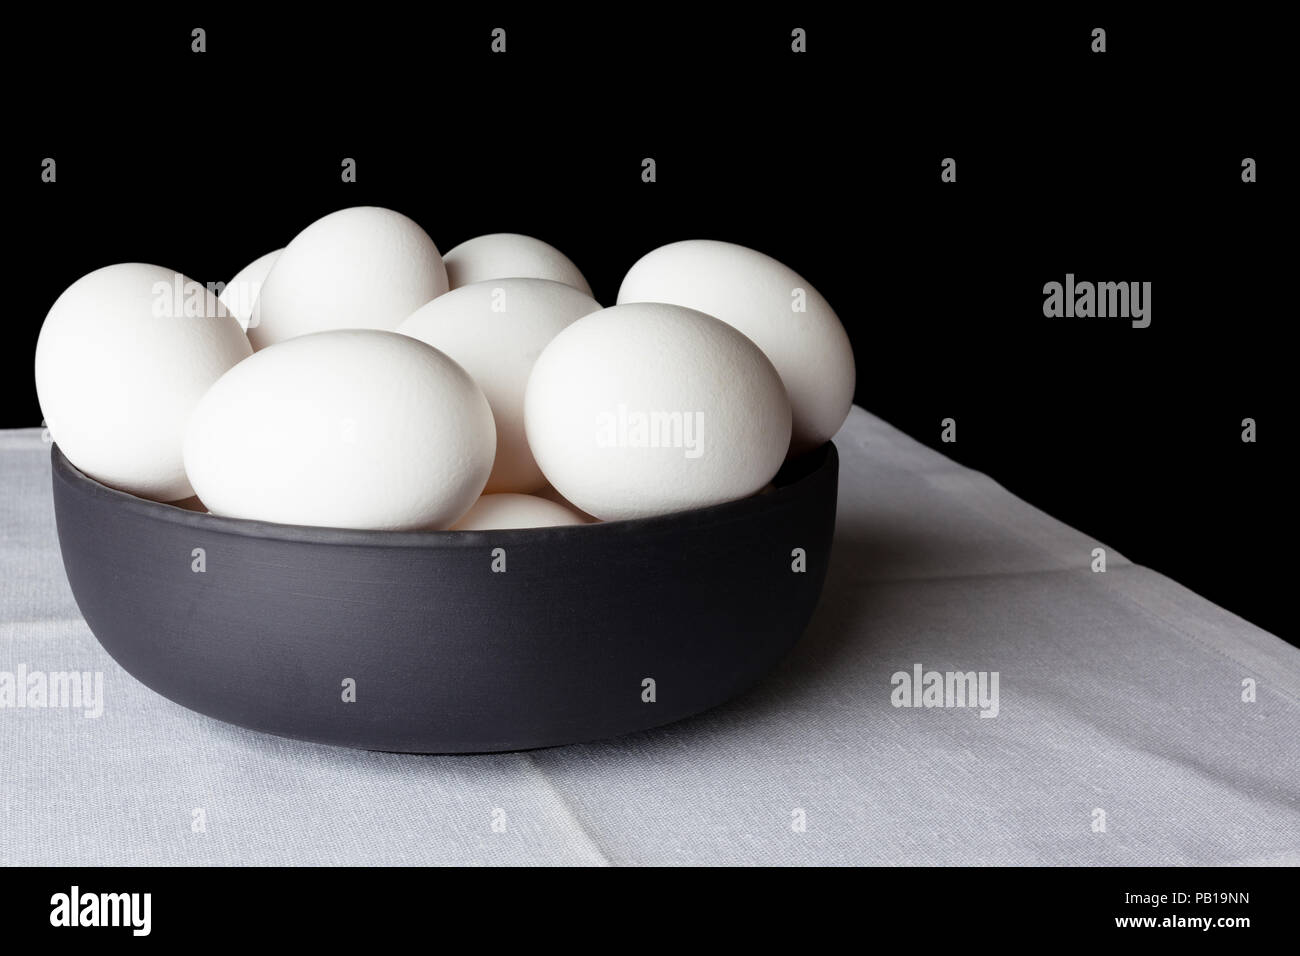 White eggs in a black bowl on white linen napkin on black background from side off centre composition Stock Photo